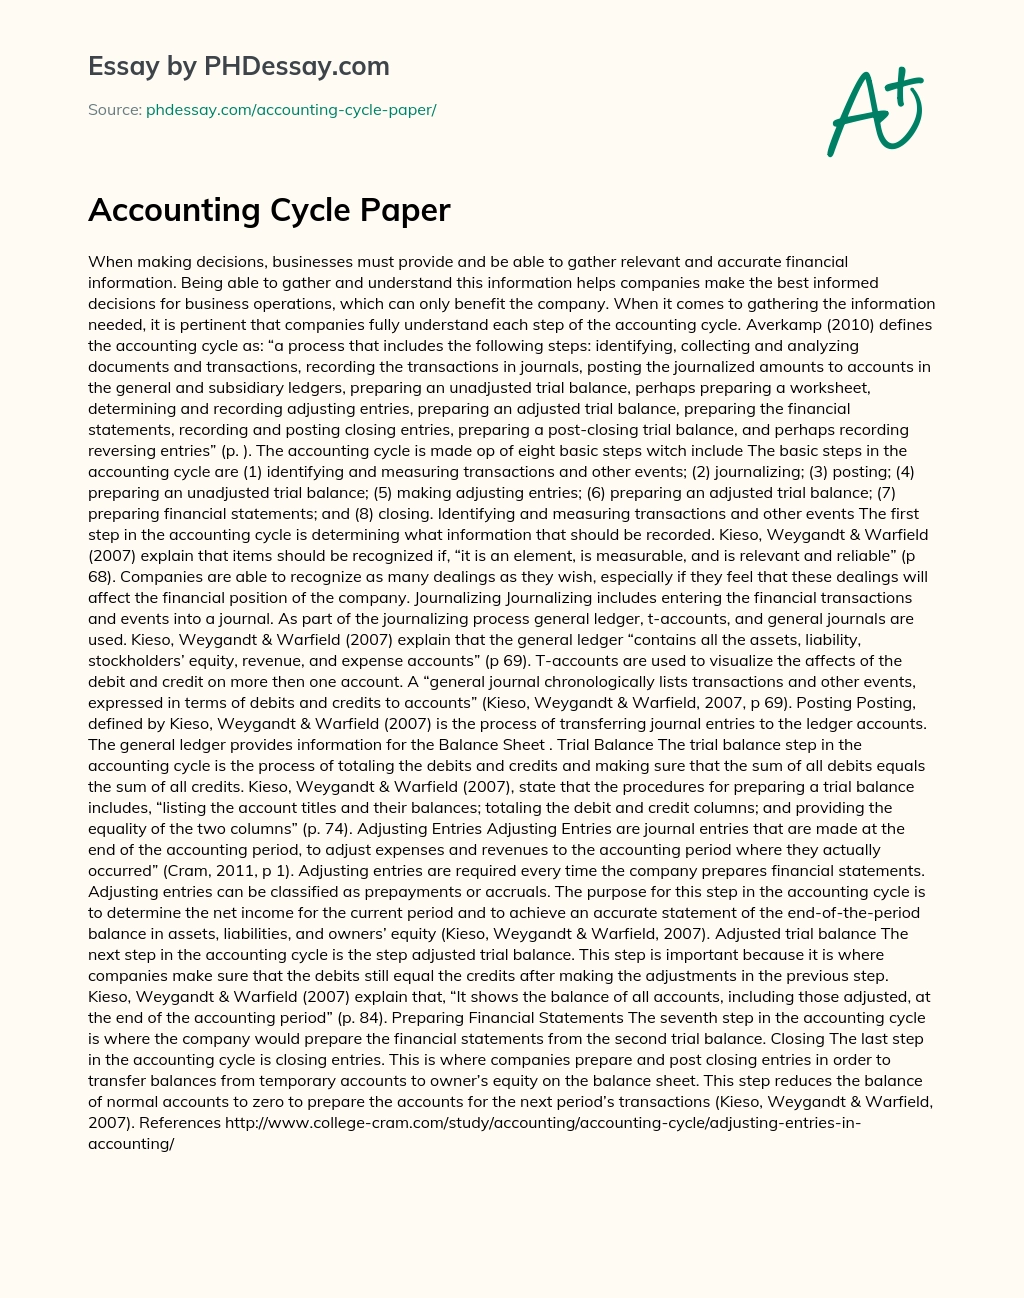 Accounting Cycle Paper essay